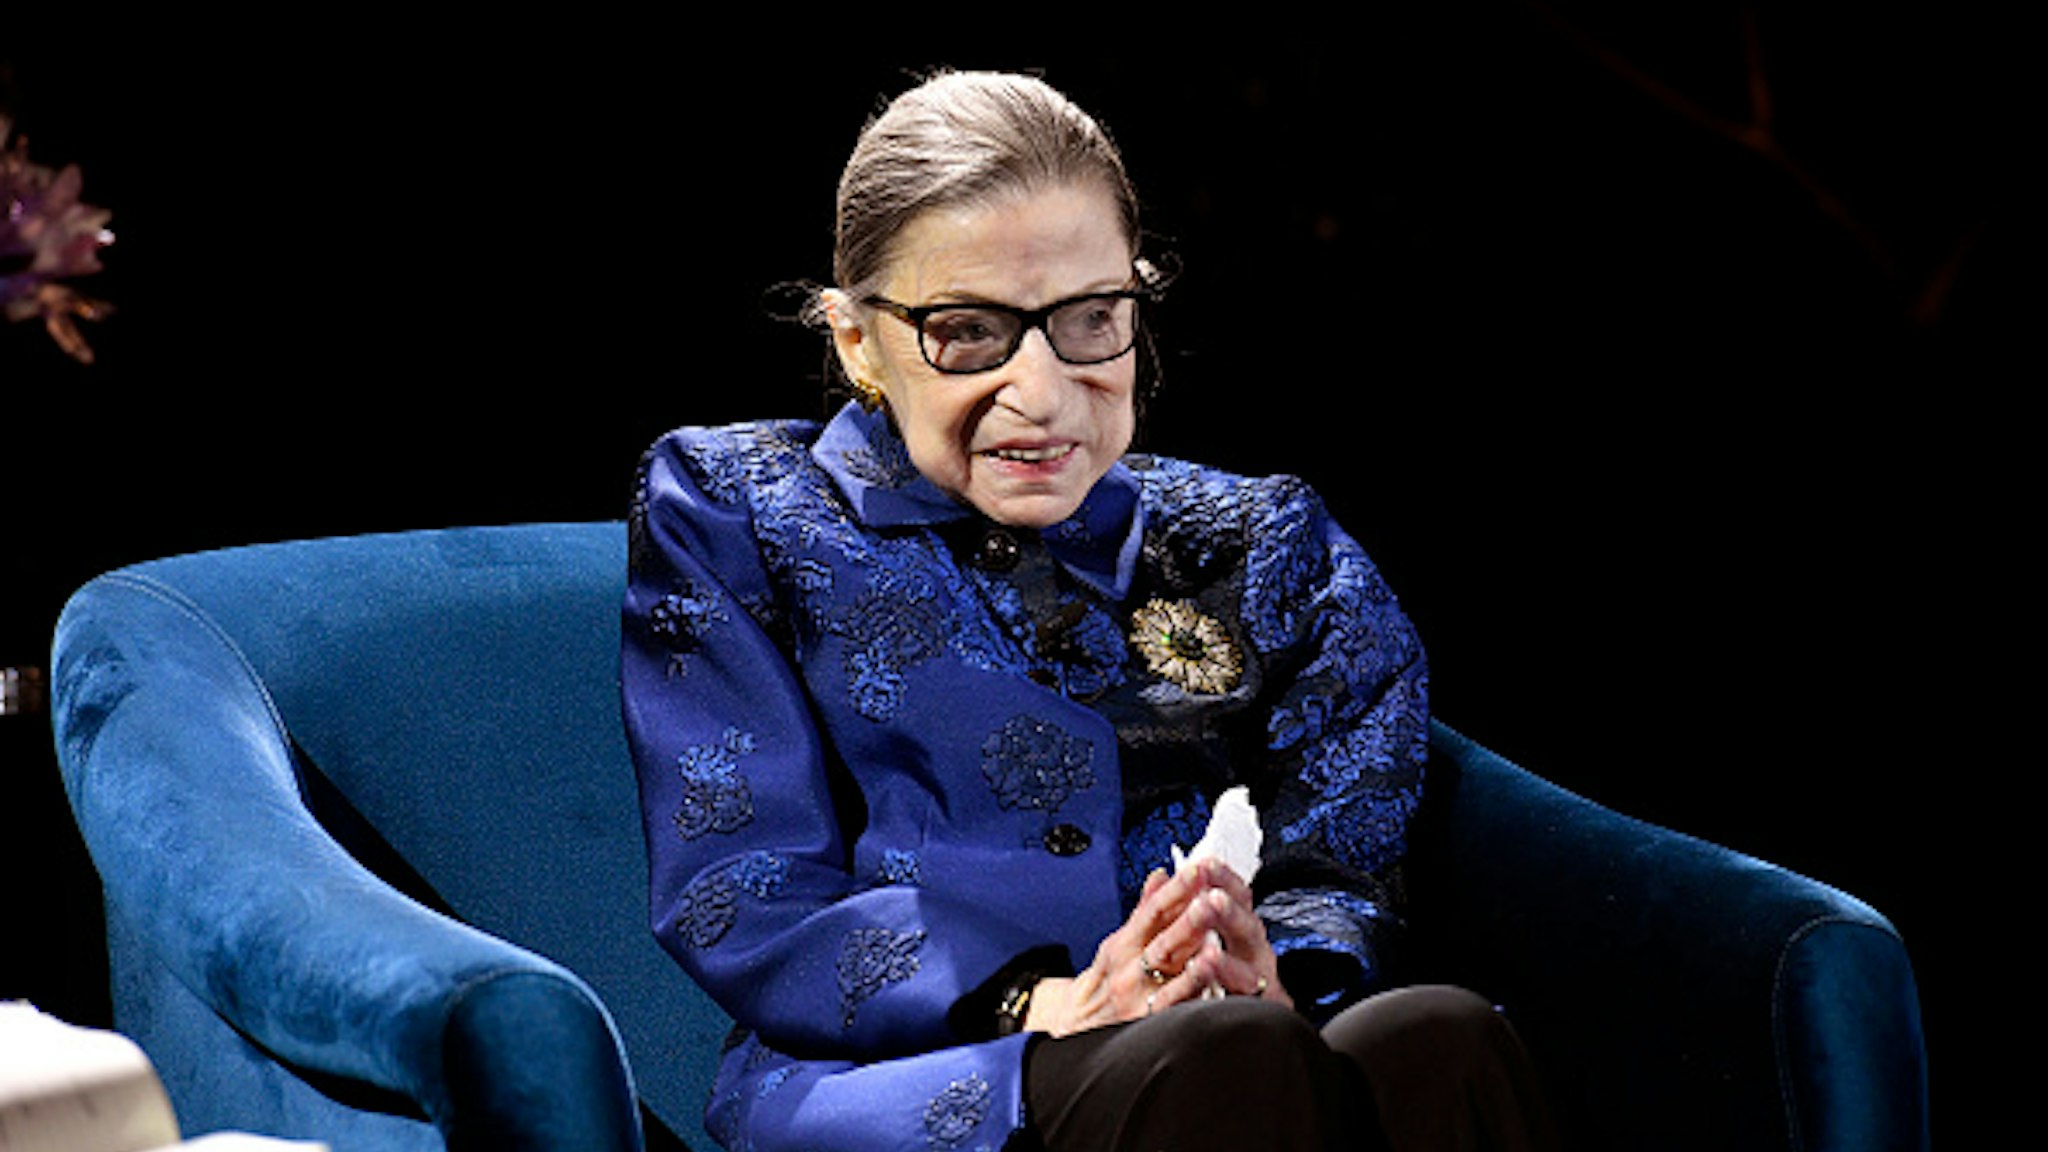 NEW YORK, NEW YORK - DECEMBER 16: Justice Ruth Bader Ginsburg speaks onstage at the Fourth Annual Berggruen Prize Gala celebrating 2019 Laureate Supreme Court Justice Ruth Bader Ginsburg In New York City on December 16, 2019 in New York City.